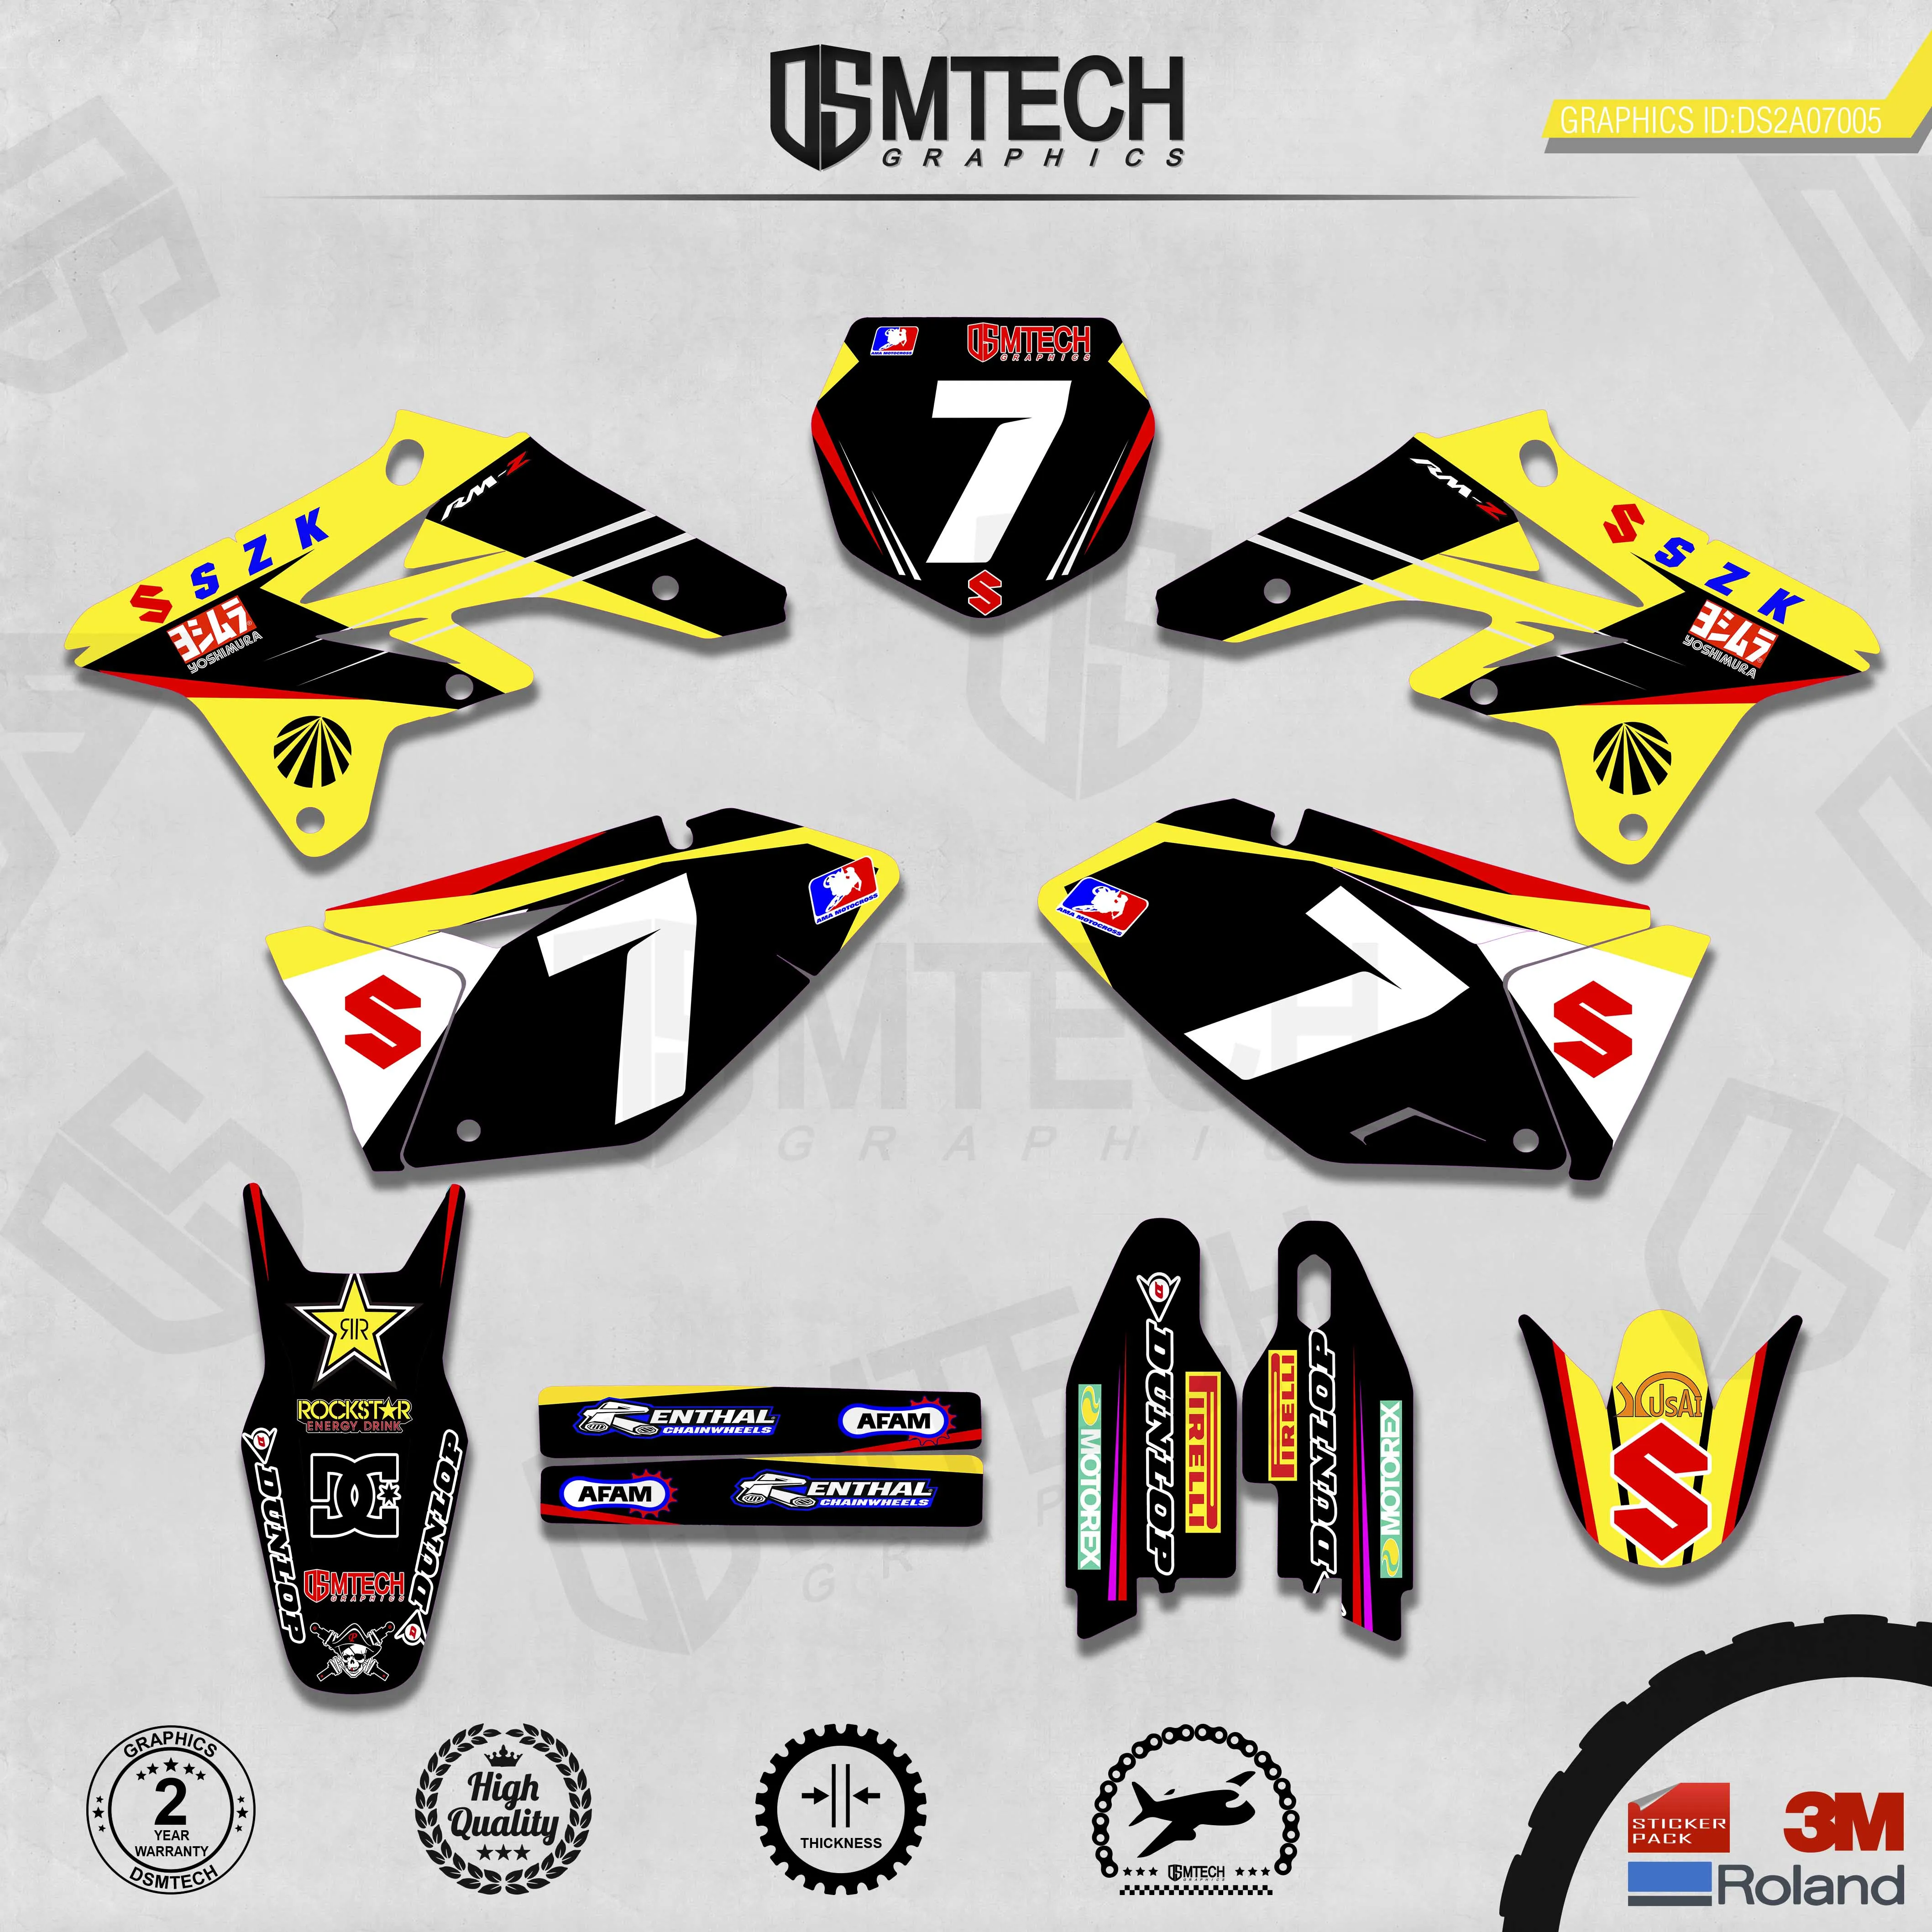 DSMTECH Customized Team Graphics Backgrounds Decals 3M Custom Stickers For 2007-2009 RMZ250  005